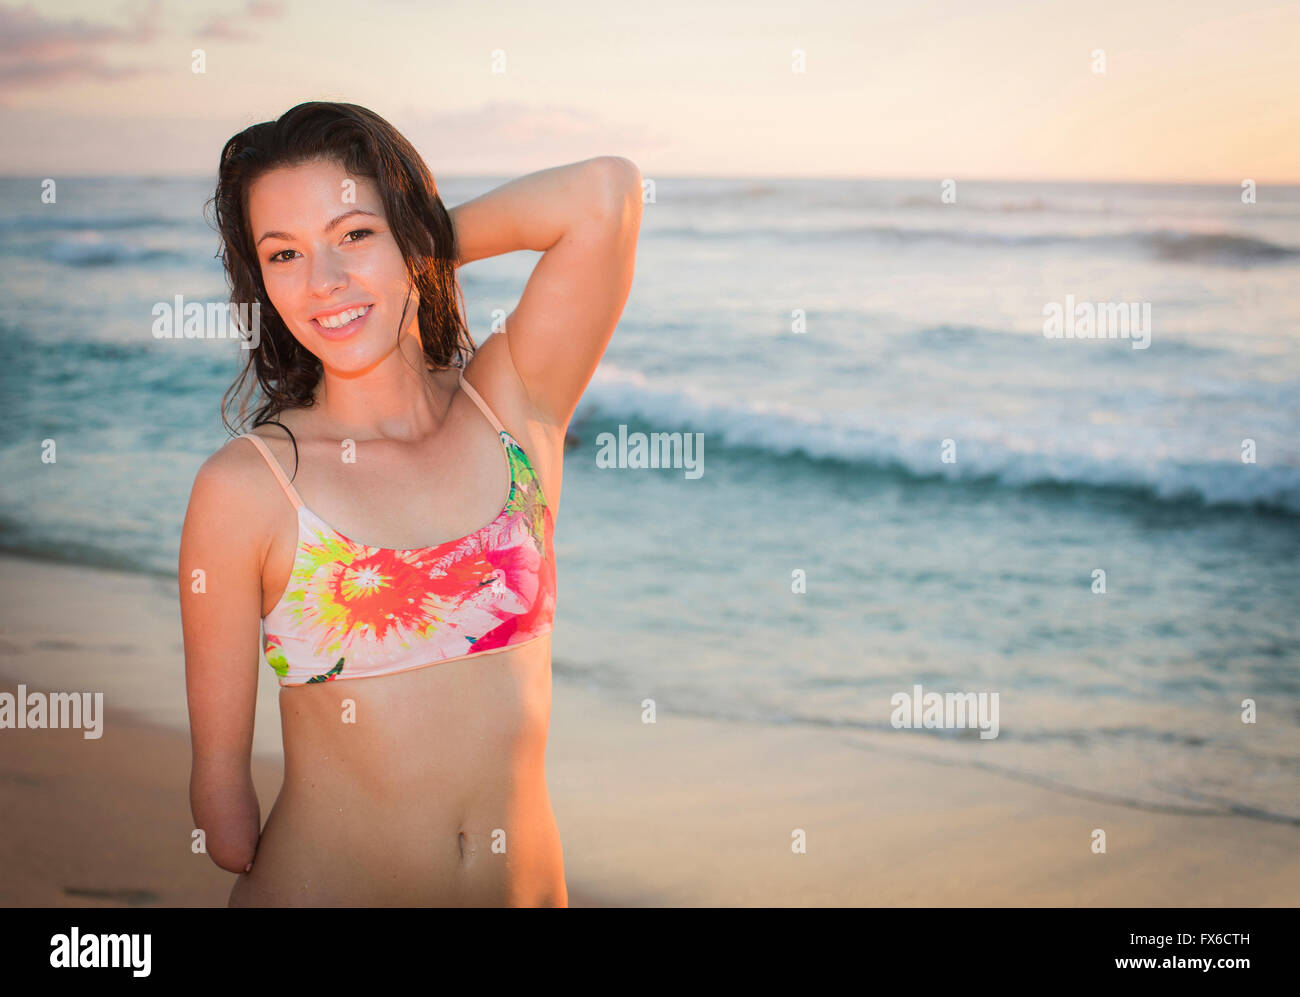 Mixed Race amputee smiling on beach Banque D'Images